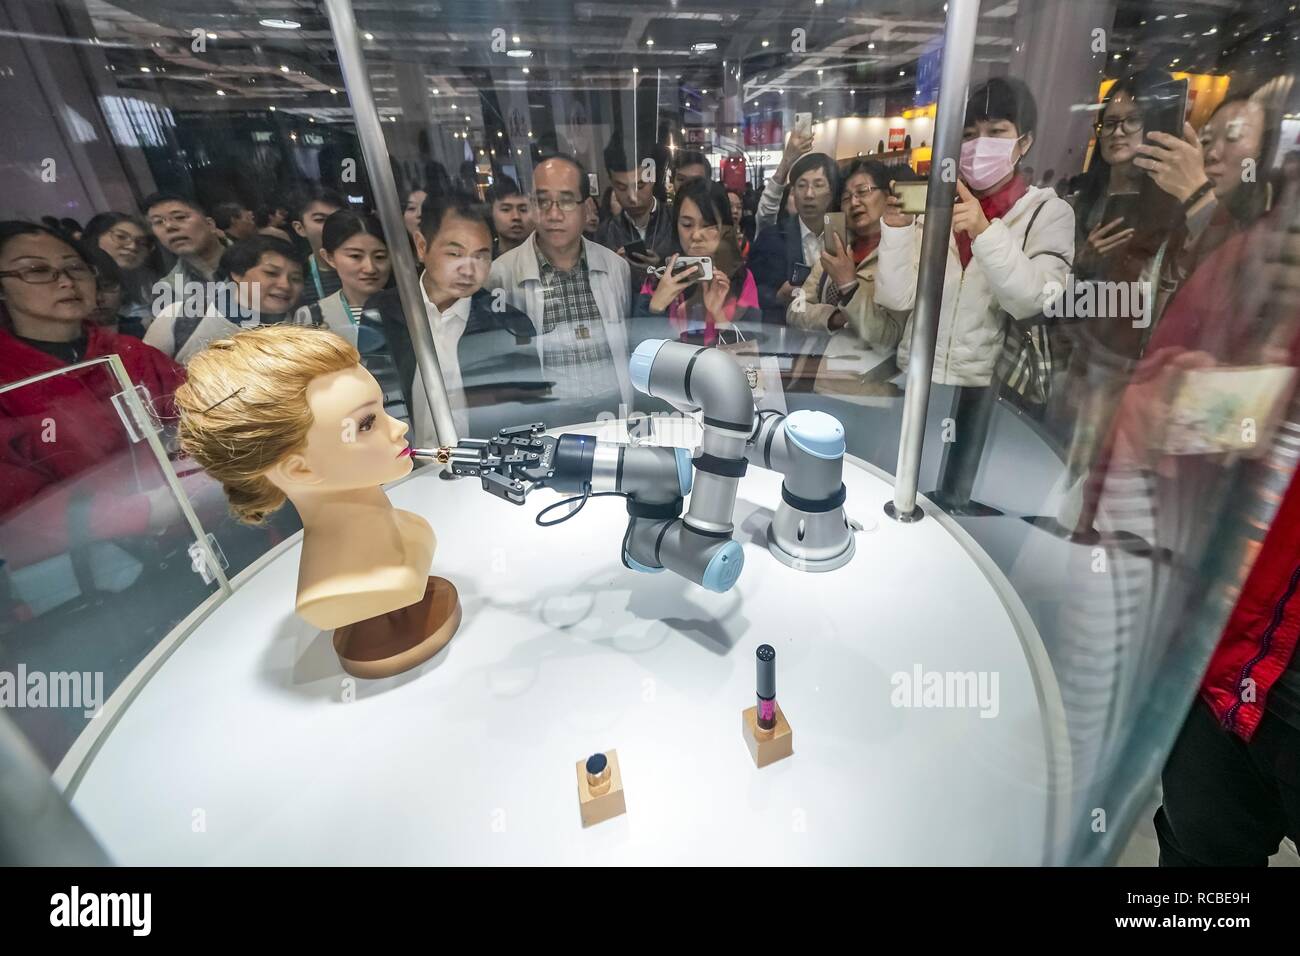 (190115) -- BEIJING, Jan. 15, 2019 (Xinhua) -- Visitors view a robot arm performing makeup tutorship at the Apparel, Accessories & Consumer Goods area of the first China International Import Expo (CIIE) in Shanghai, east China, Nov. 9, 2018. China's foreign trade rose 9.7 percent year on year to a historic high of 30.51 trillion yuan (about 4.5 trillion U.S. dollars) in 2018, the General Administration of Customs (GAC) said Monday. Exports rose 7.1 percent year on year to 16.42 trillion yuan last year, while imports grew 12.9 percent to 14.09 trillion yuan, resulting in a trade surplus Stock Photo